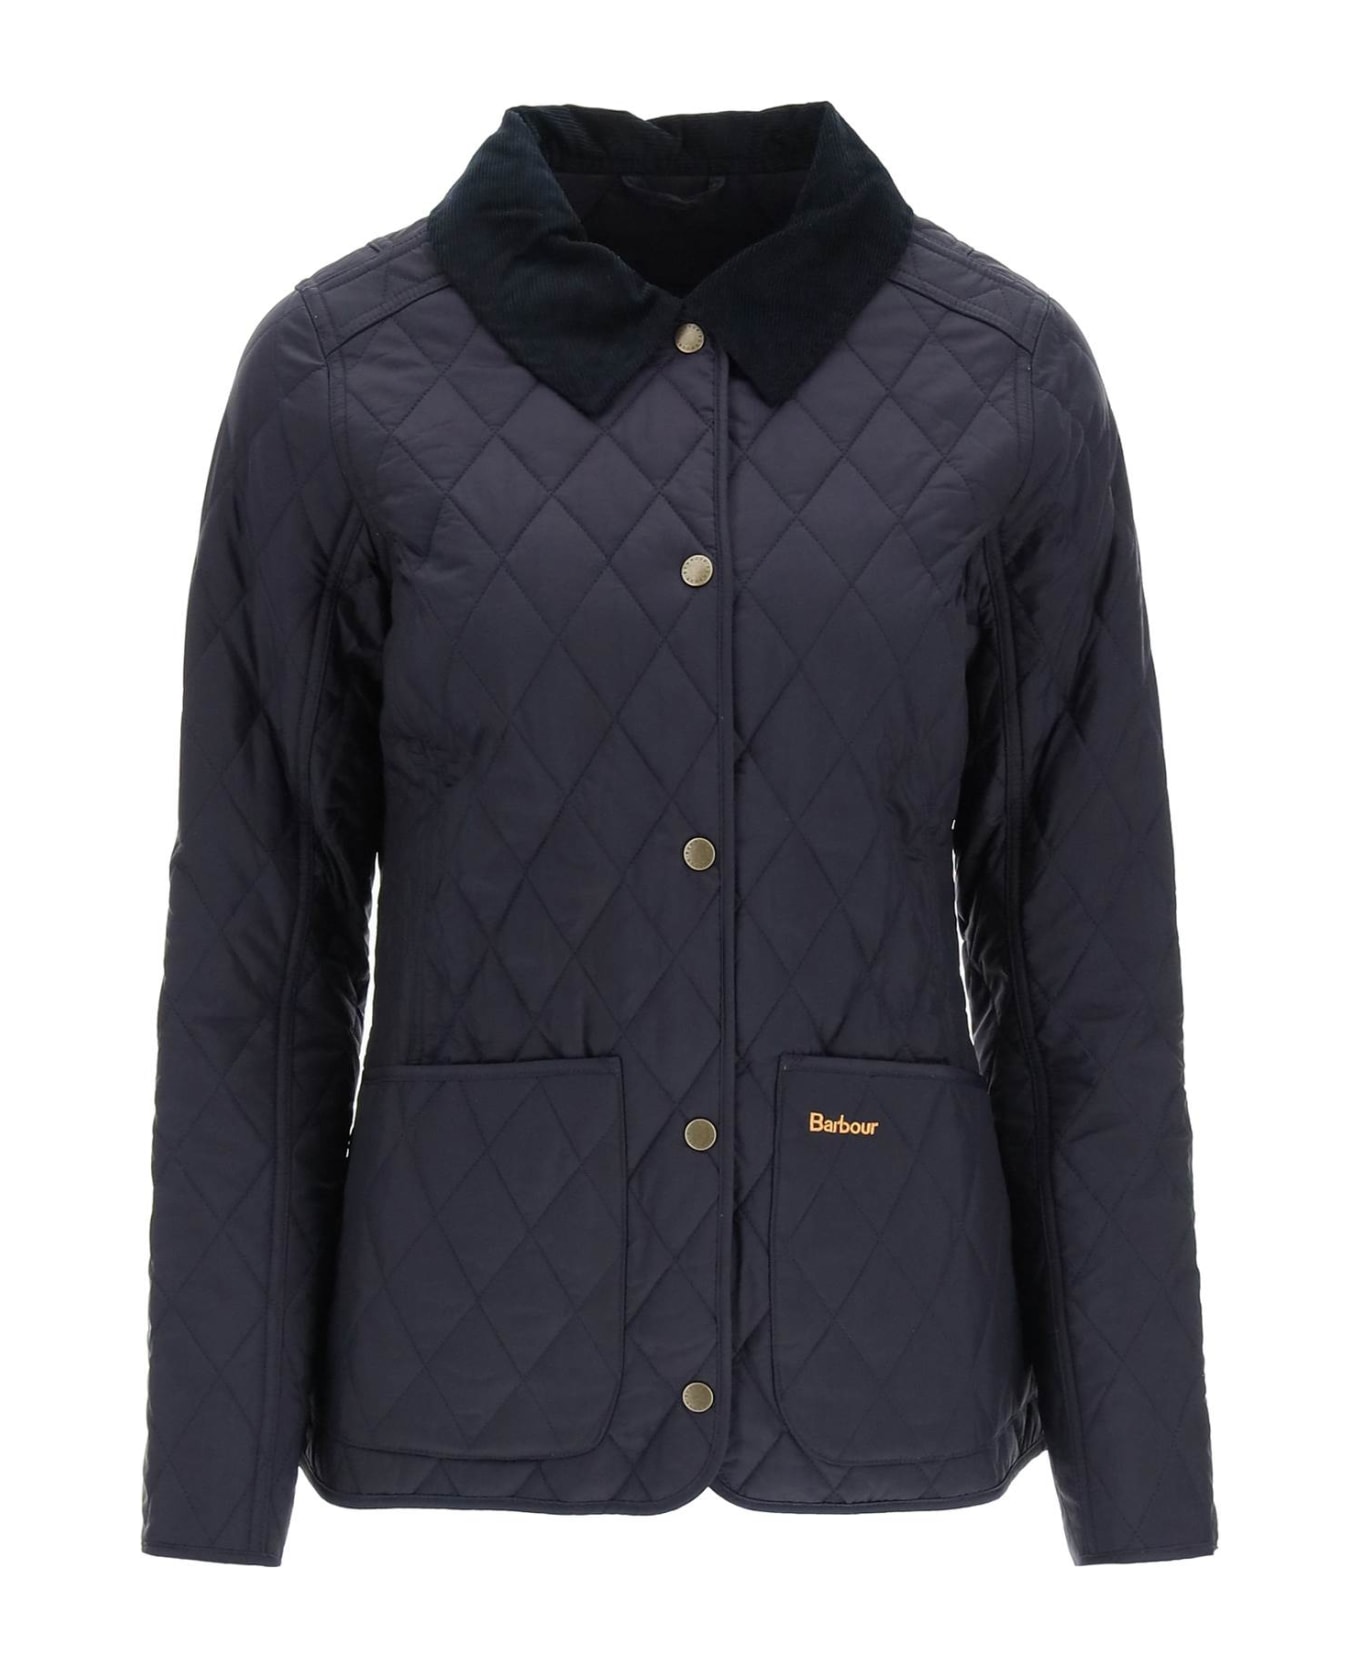 Barbour Annandale Diamond Quilted Jacket - NAVY (Blue)